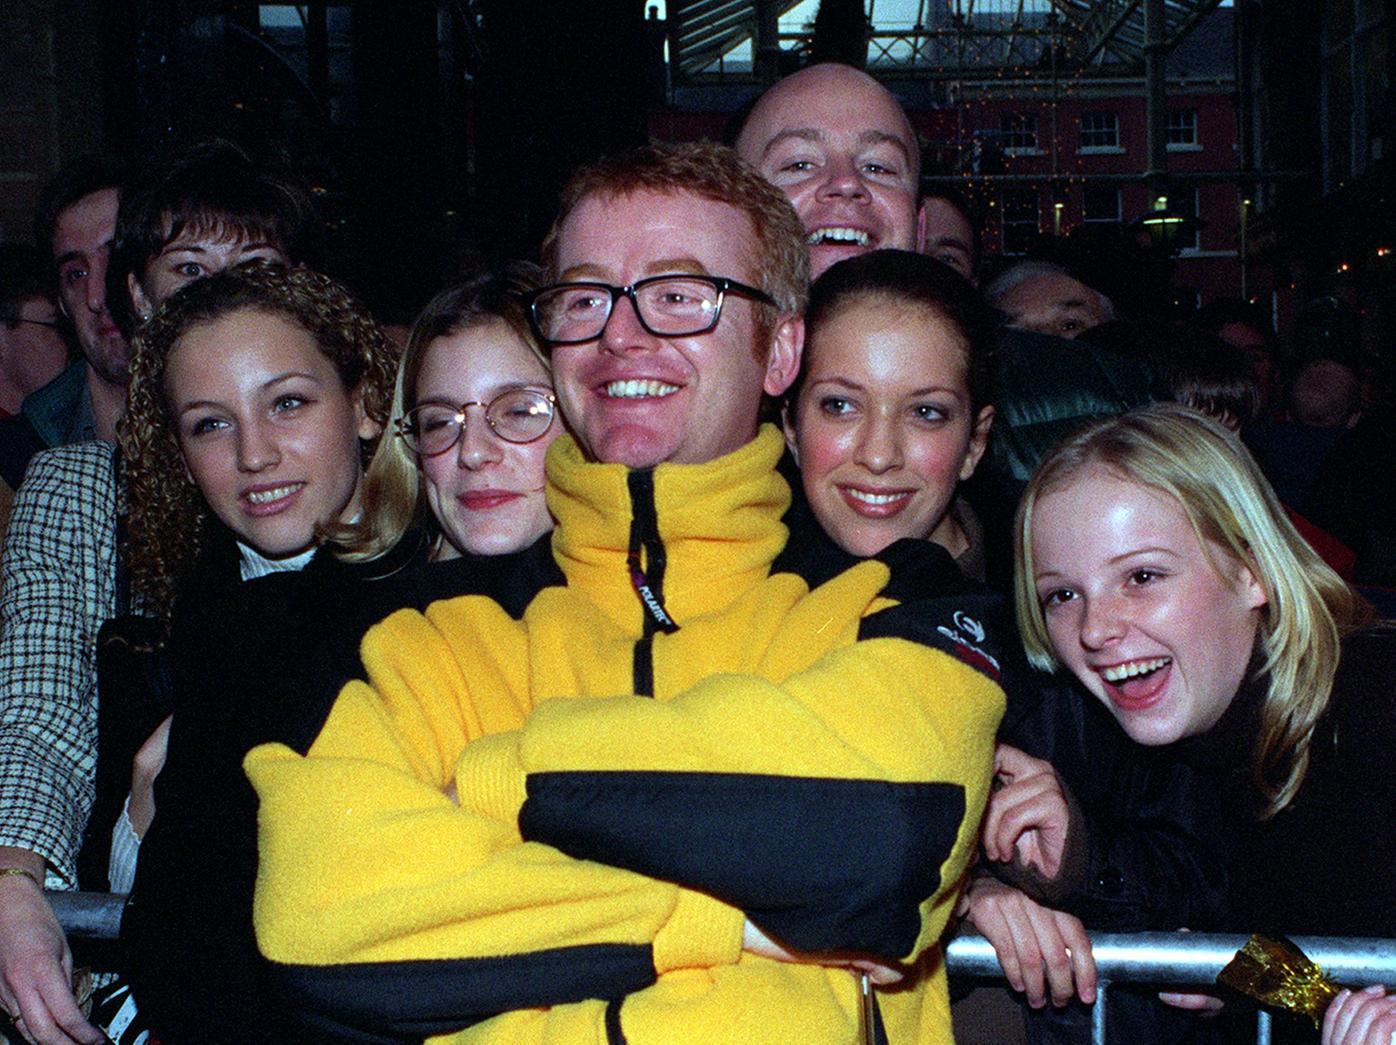 Fans crowd round the new Virgin Radio boss Chris Evans during a special charity shop sale held at Harvey Nichols in December 1997.